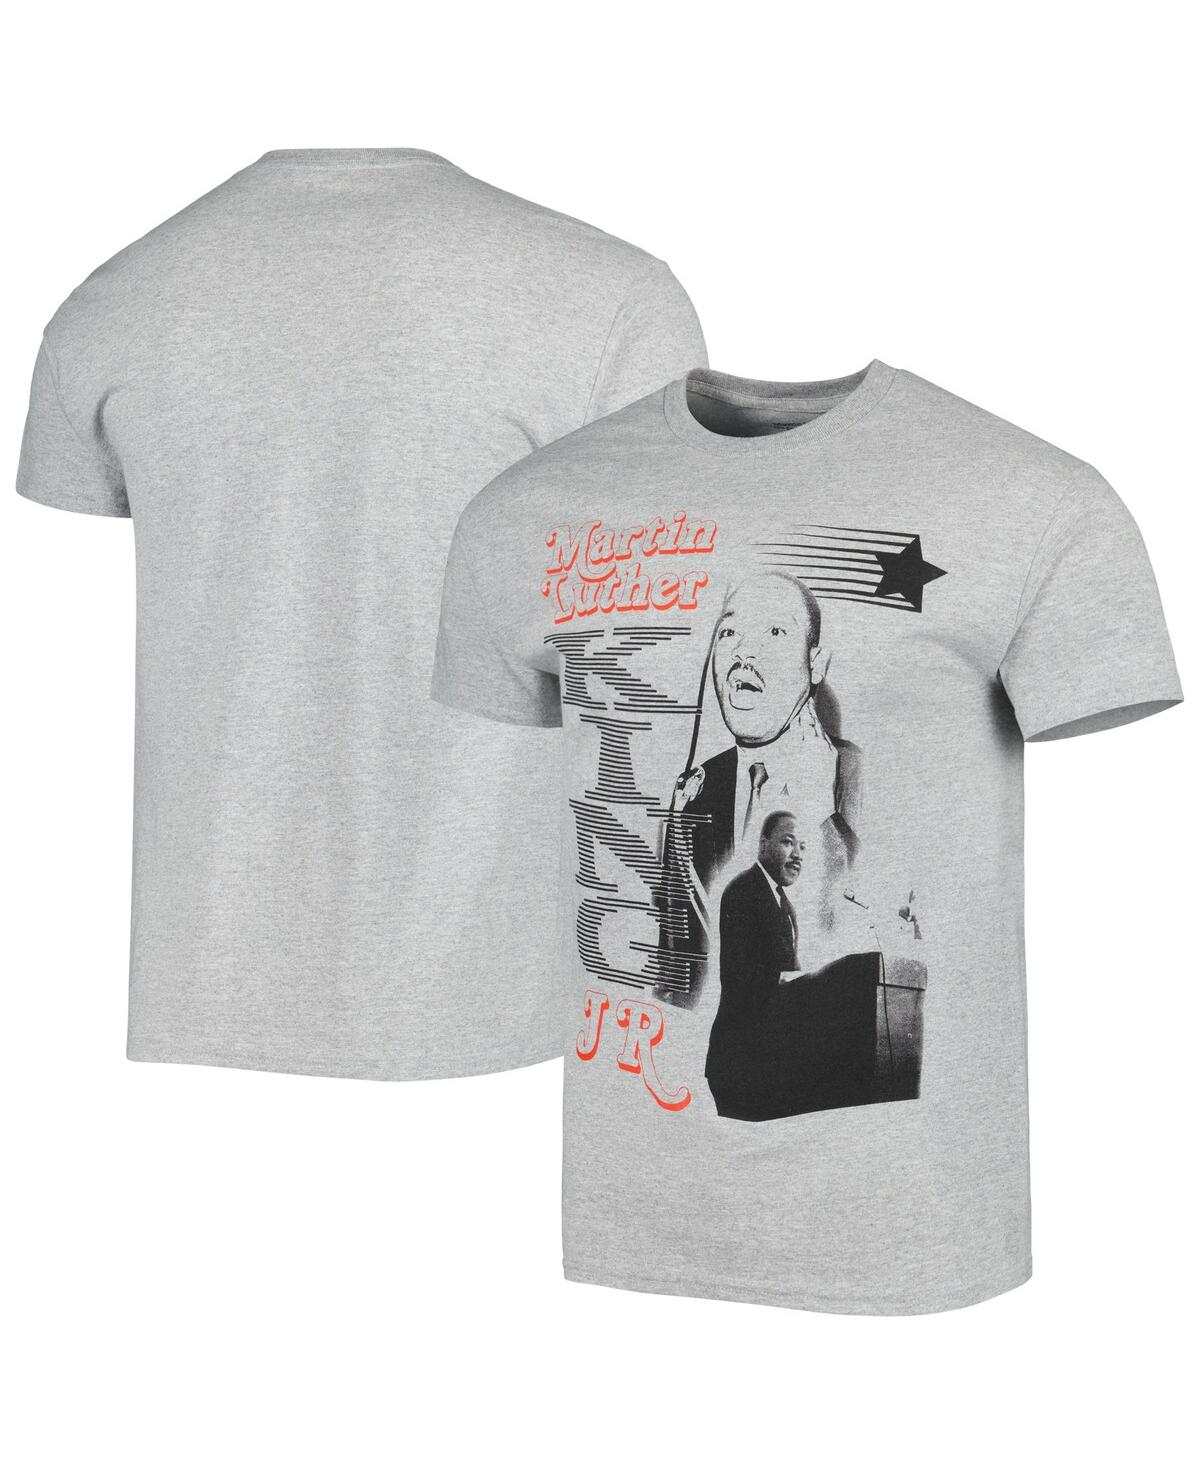 Men's and Women's Gray Martin Luther King Jr. Graphic T-shirt - Gray